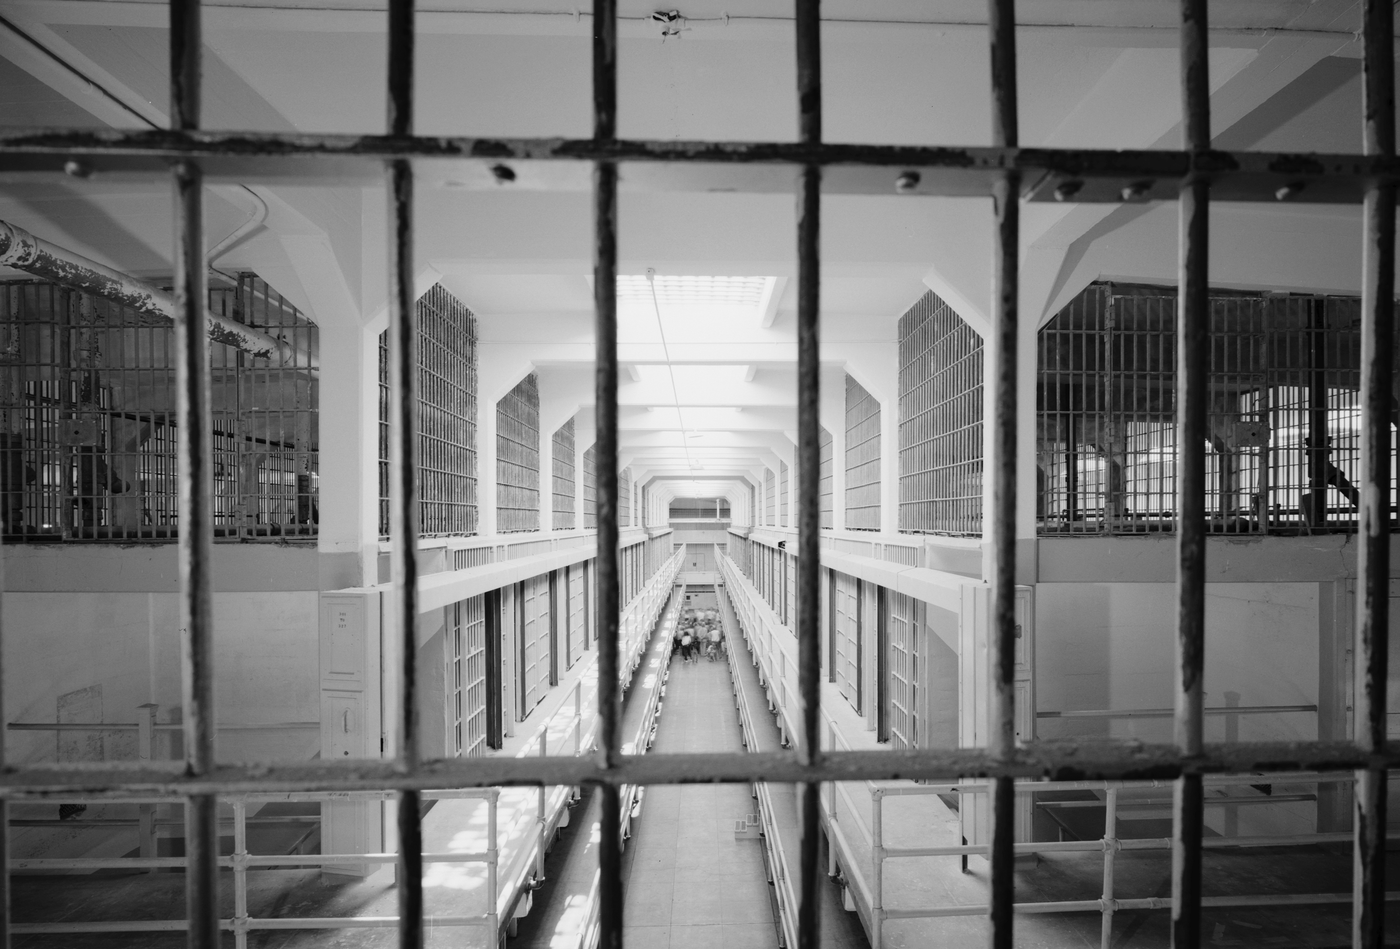 View of the interior of the Alcatraz Island prison in 1986, looking south from the third level guard station with cell block B on the left and cell block C on the right. The island was used as a maximum security federal prison from 1934 to 1963. It housed such notorious criminals as Al Capone, George "Machine Gun" Kelly, Alvin "Creepy" Karpis, Arthur "Doc" Barker, and Whitey Bulger. The FBI helped investigate a famous unsolved escape there in June 1962. Library of Congress photograph.